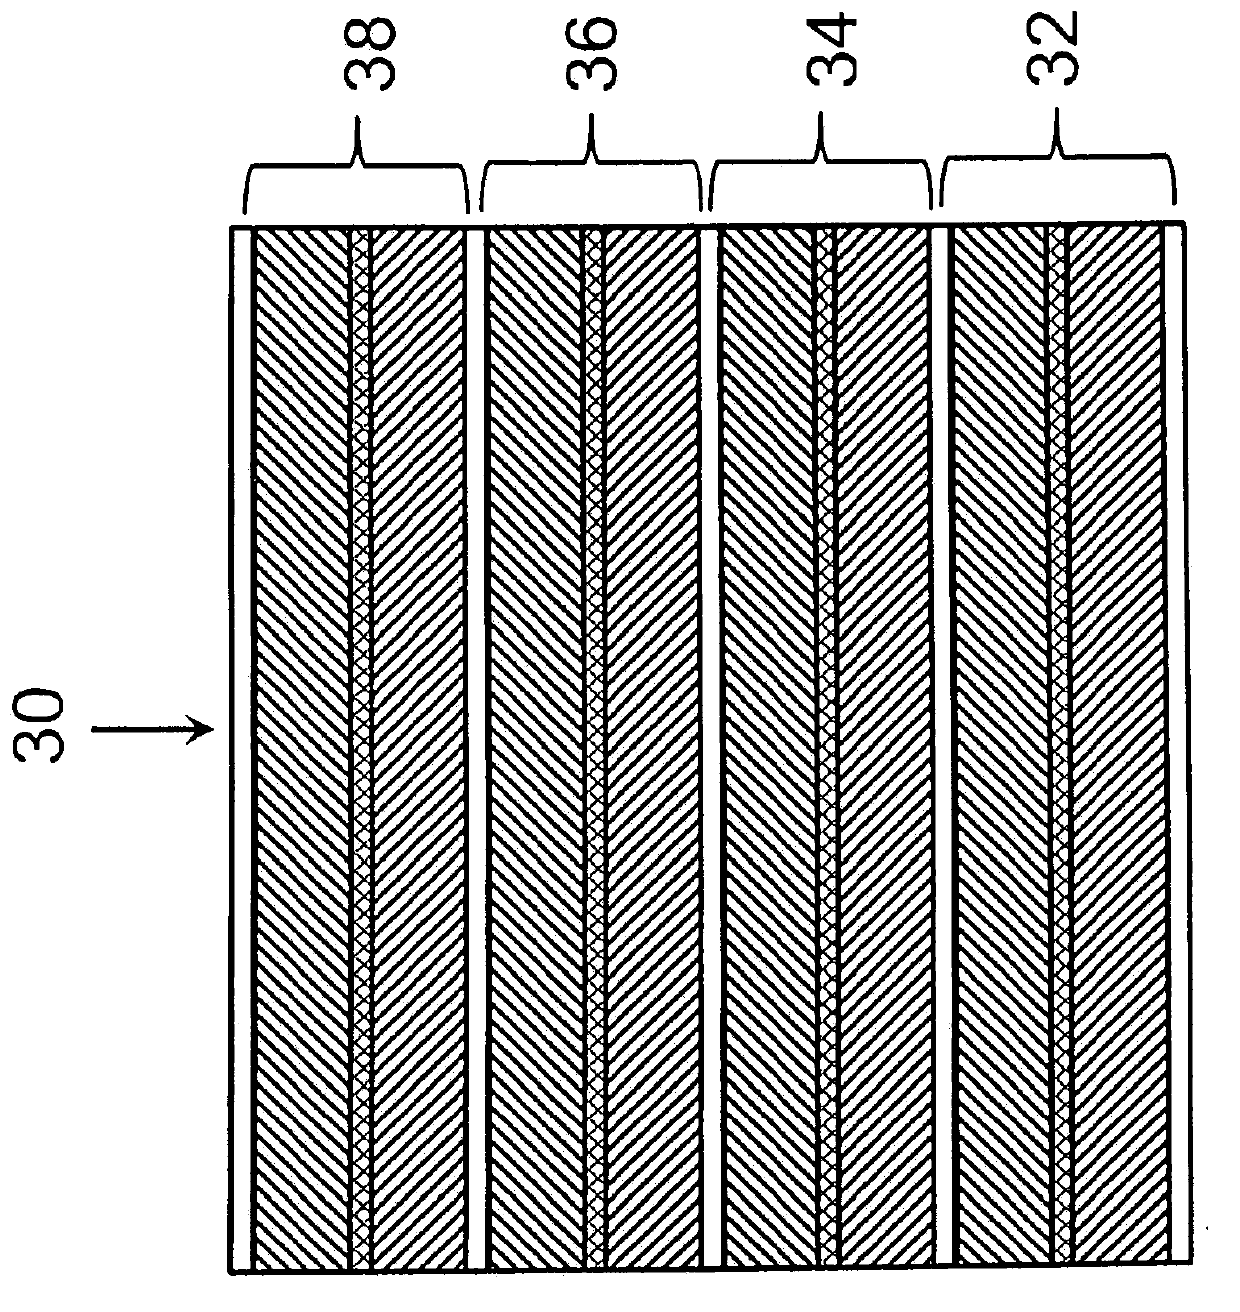 Electrolyte compositions, methods of making and battery devices formed there from